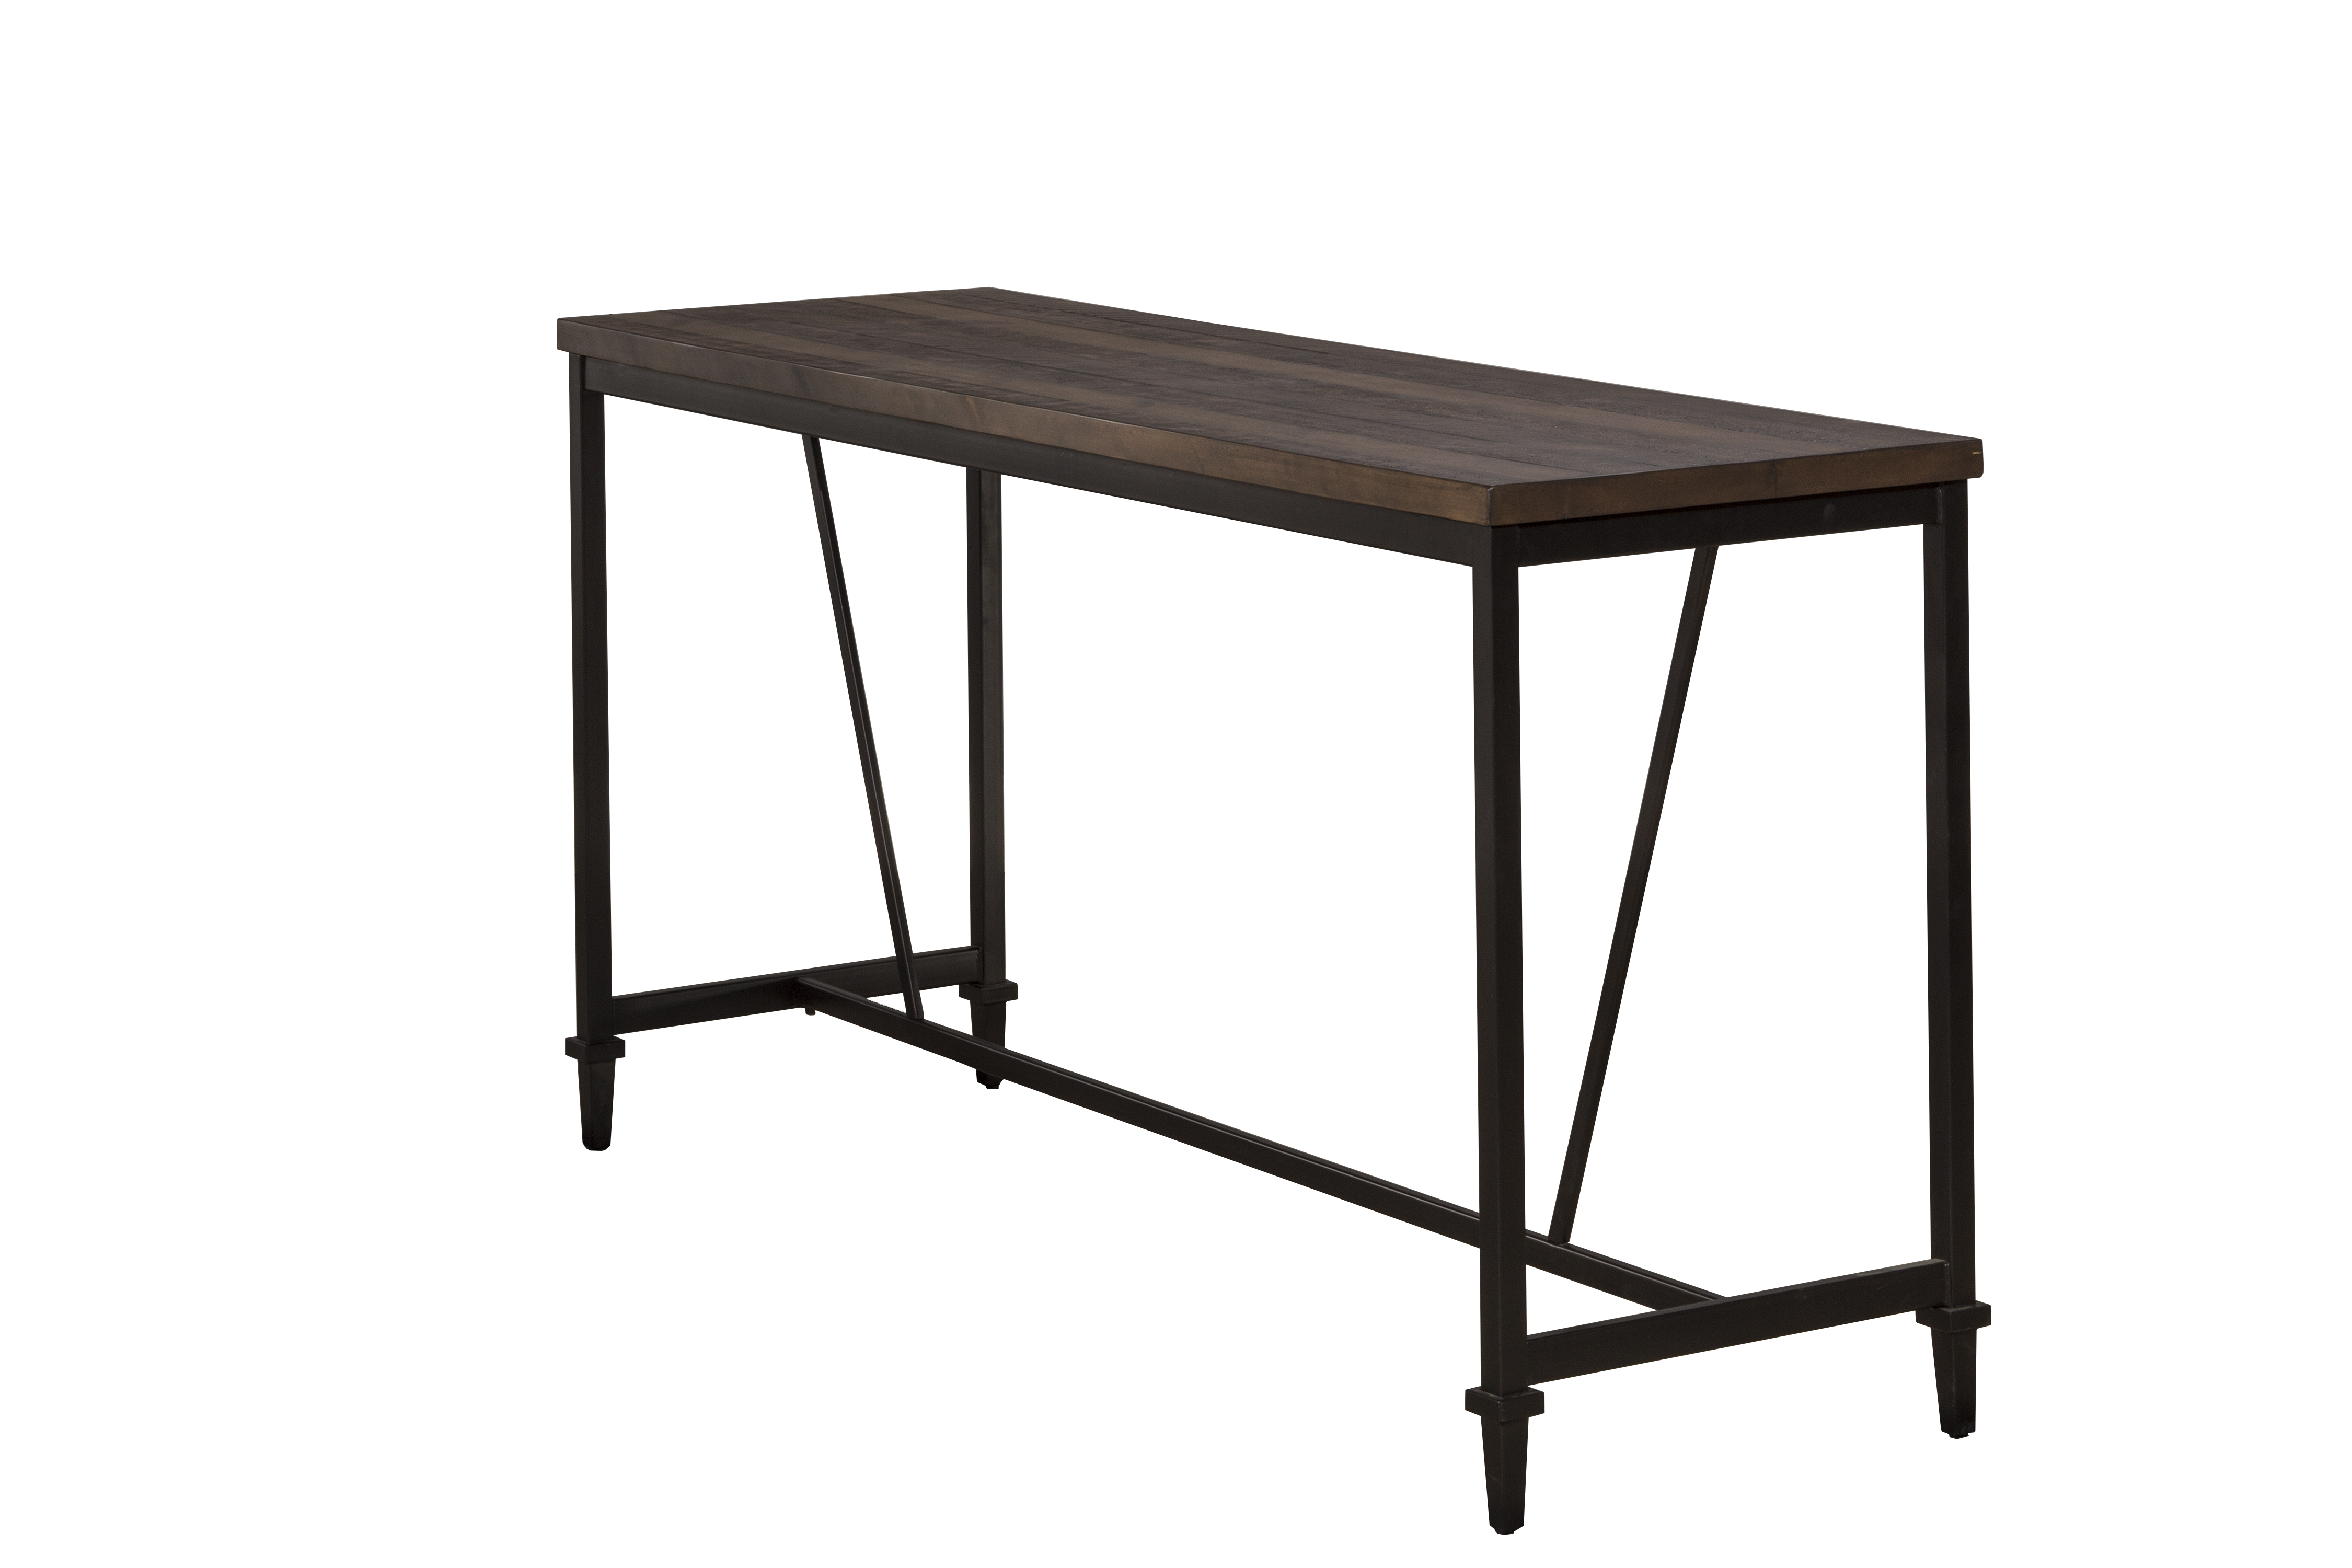 Trevino Metal Dining Table